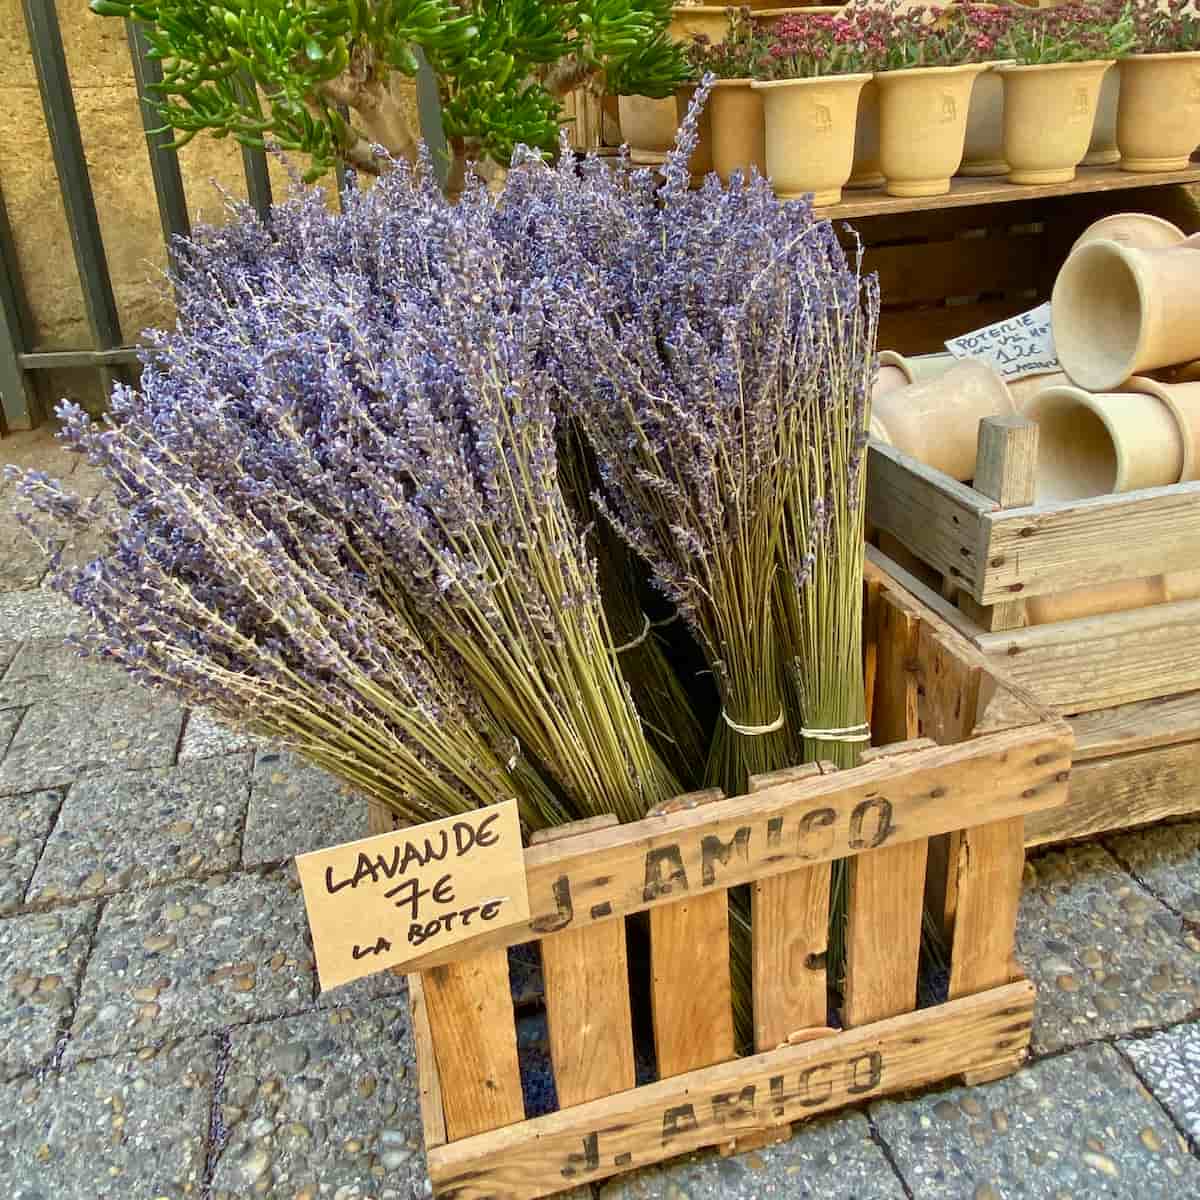 wooden crate of bunches of dried purple lavender flowers